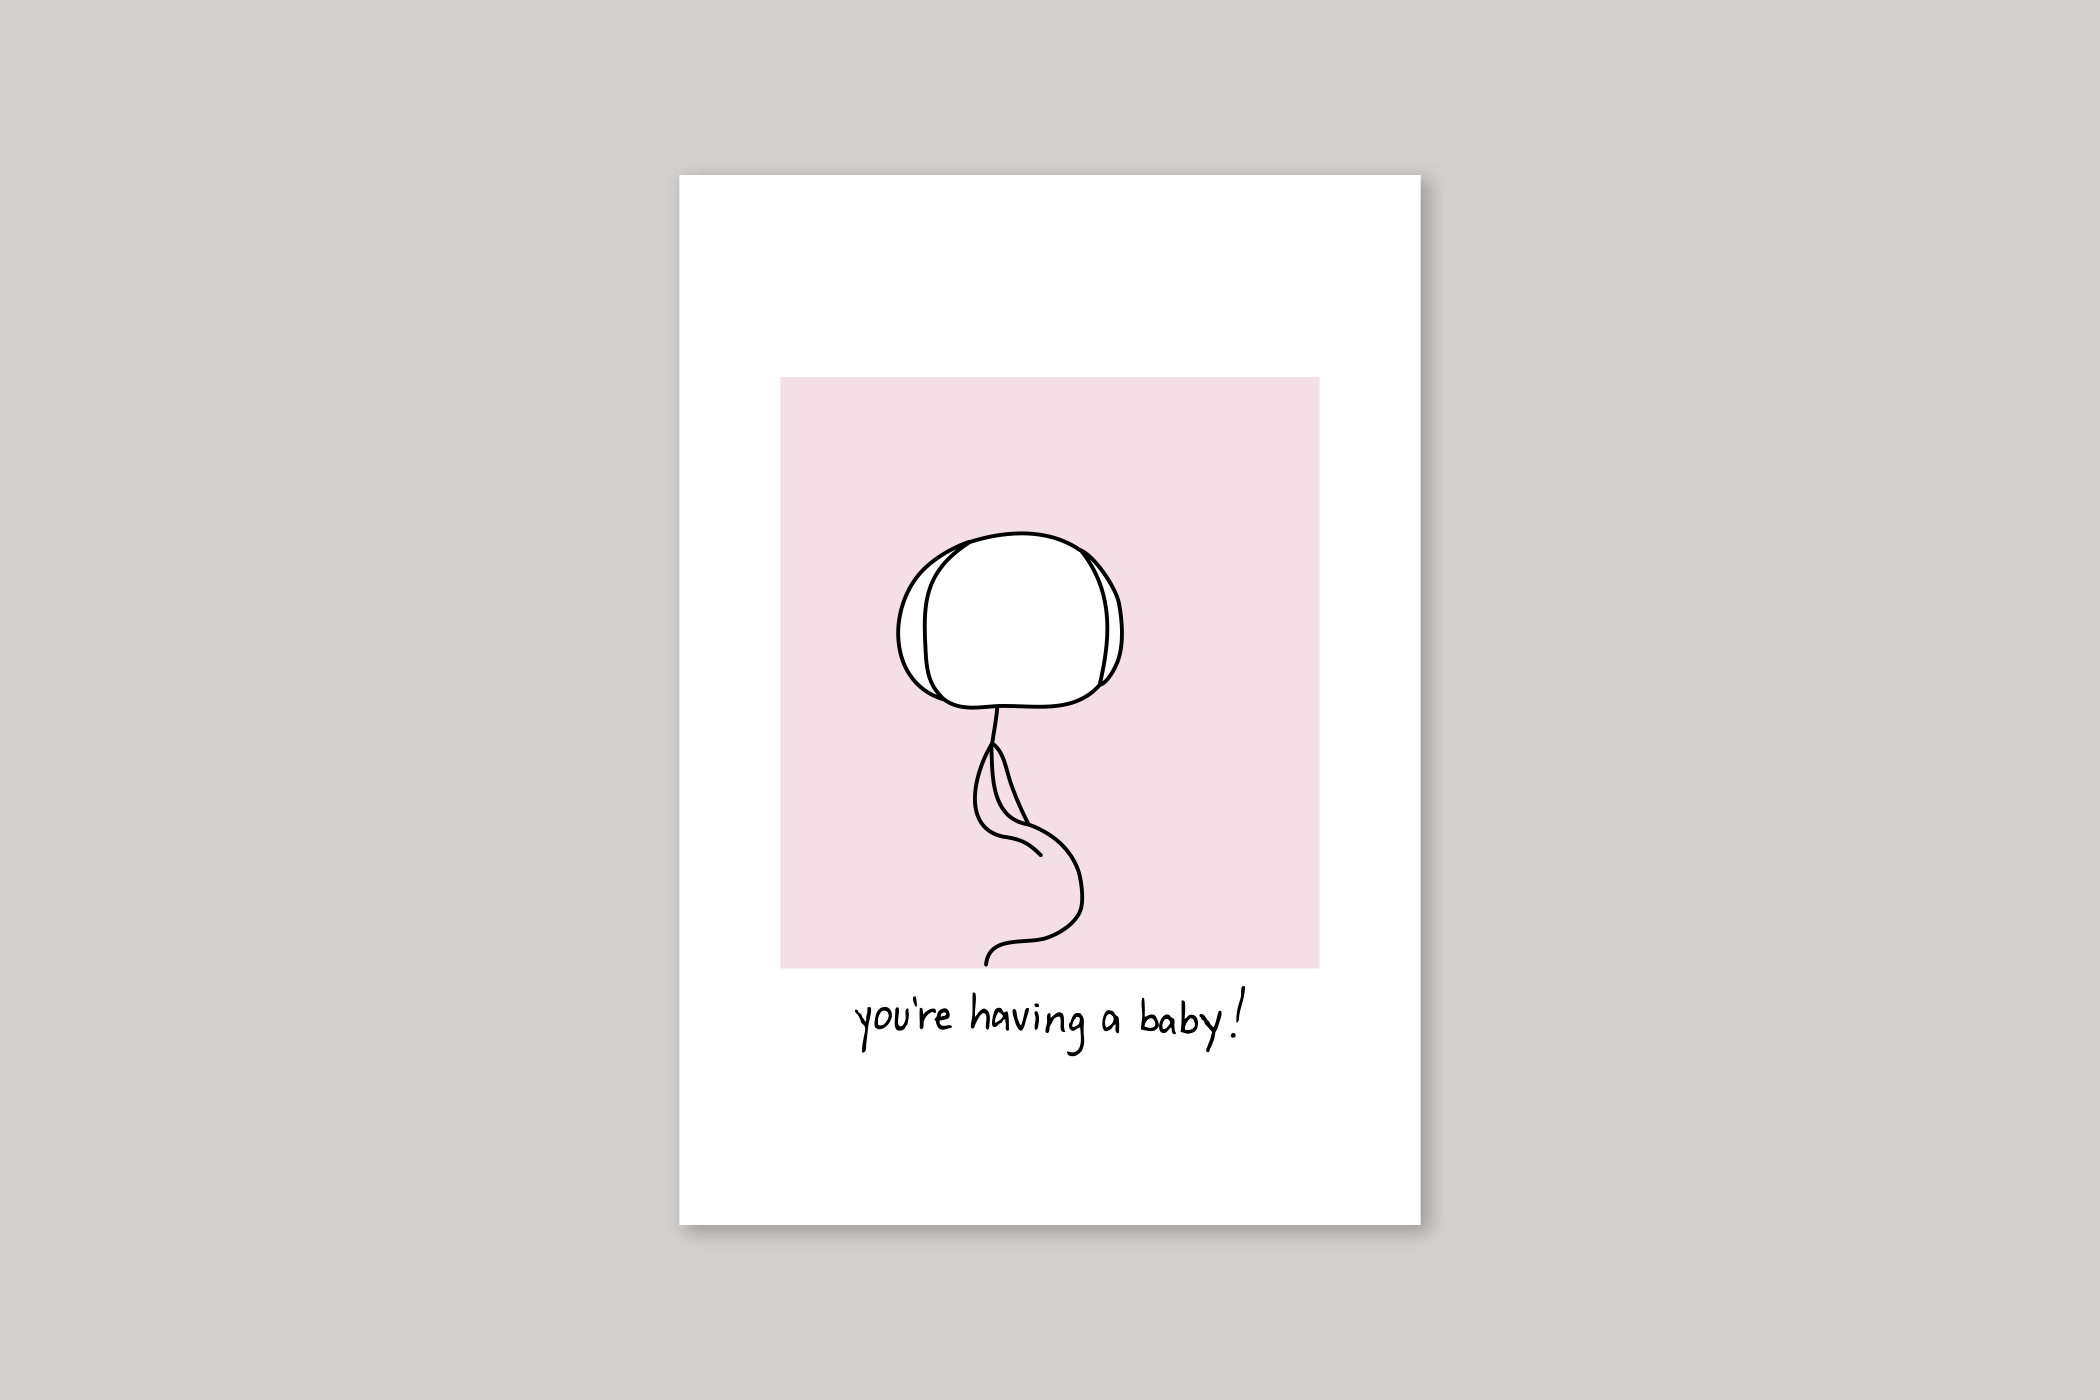 You're Having a Baby! new baby card humorous illustration from Mean Cards range of greeting cards by Icon.